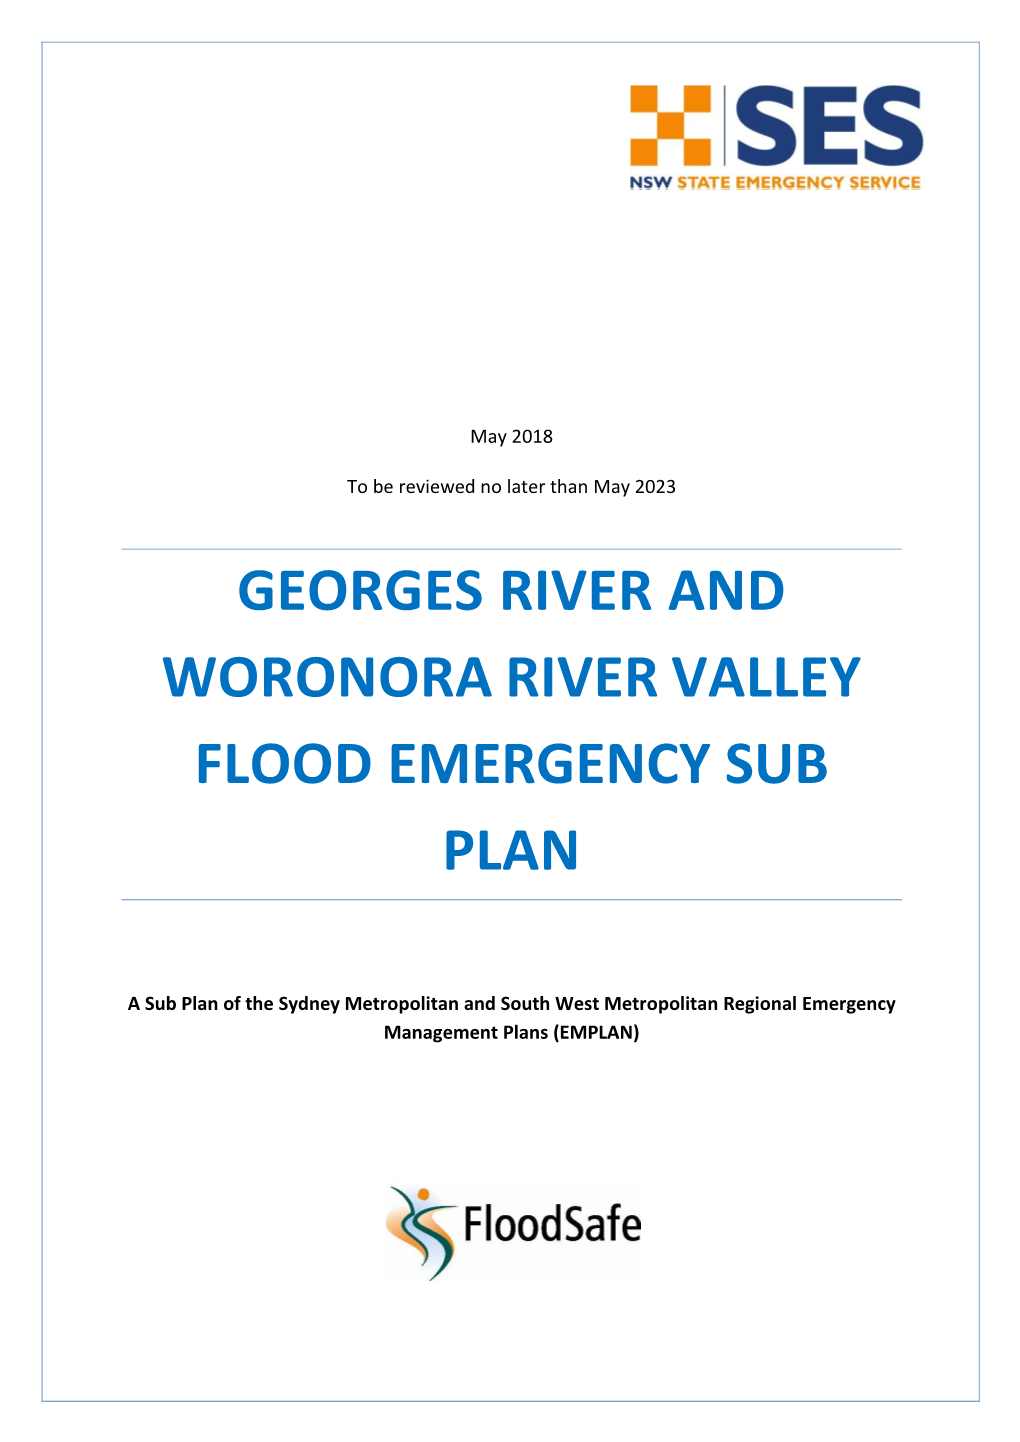 Georges River and Woronora River Valley Flood Emergency Sub Plan Volume 1